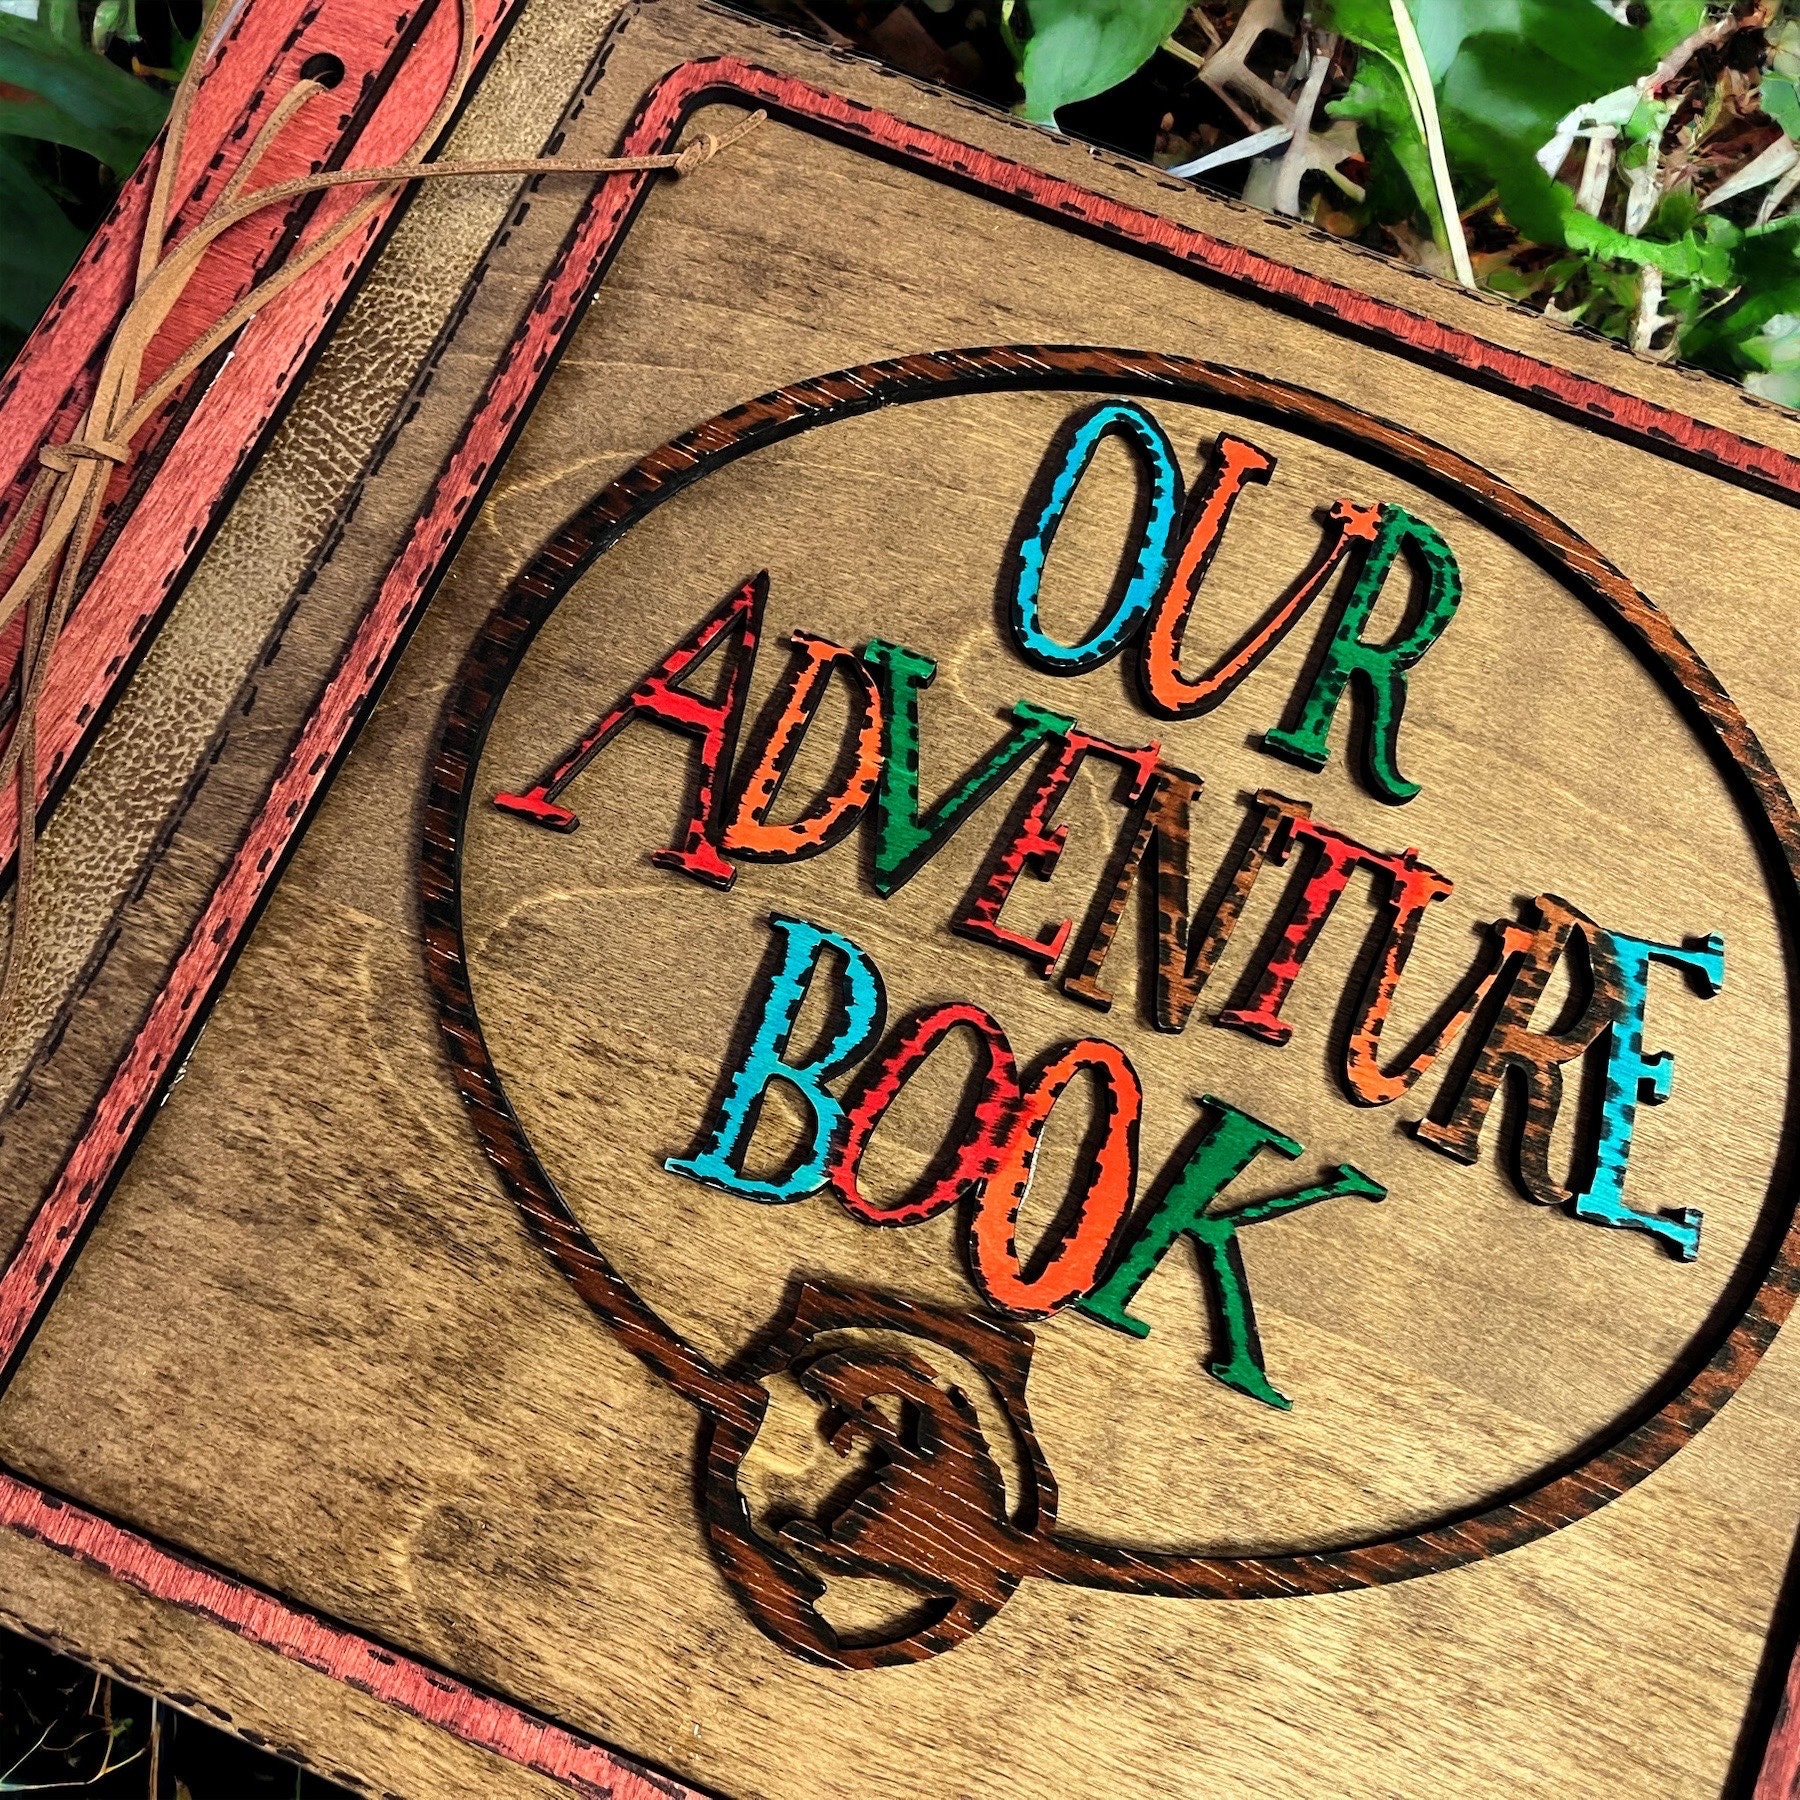 Our Adventure Book, Leather Cover with Convex Words, 11.6 x 7.5